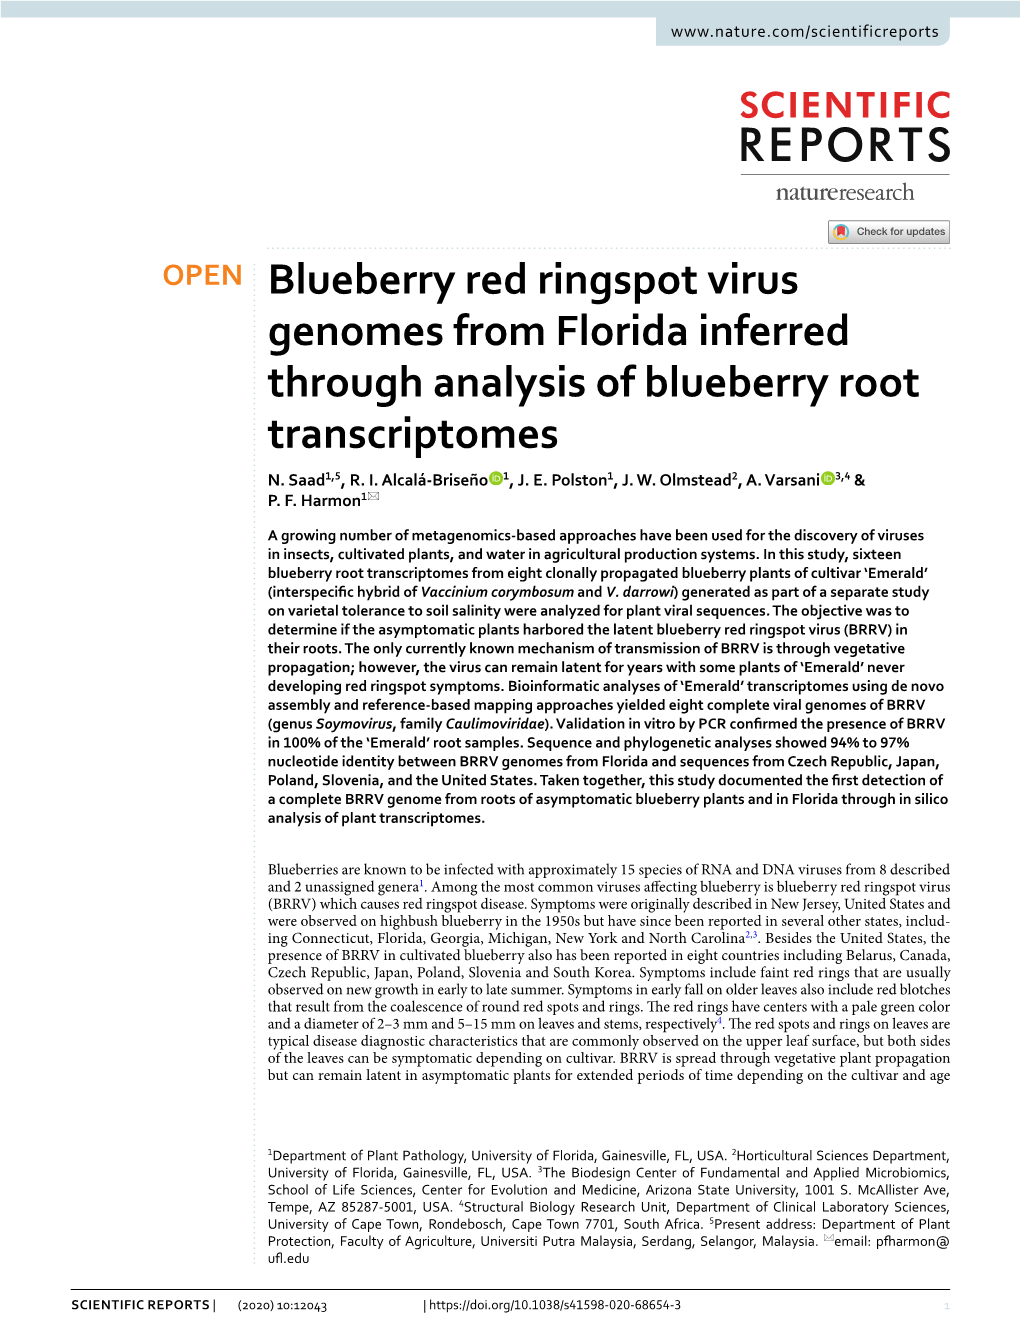 Blueberry Red Ringspot Virus Genomes from Florida Inferred Through Analysis of Blueberry Root Transcriptomes N